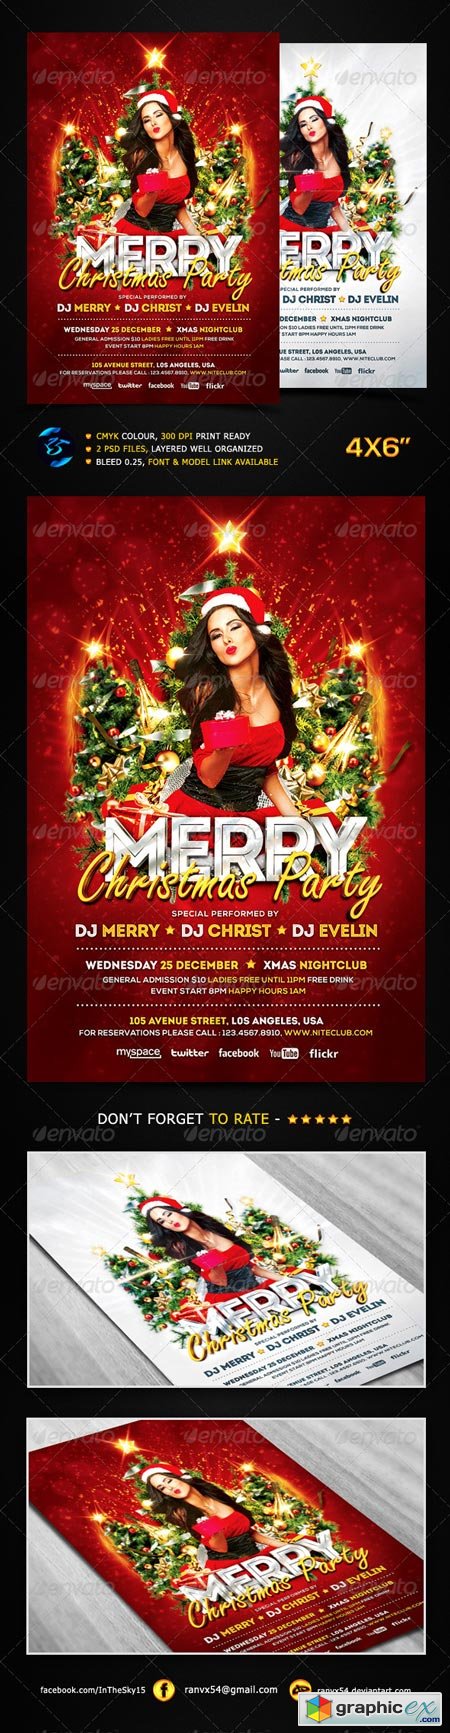 Merry Christmas Party Flyer Template 6352792